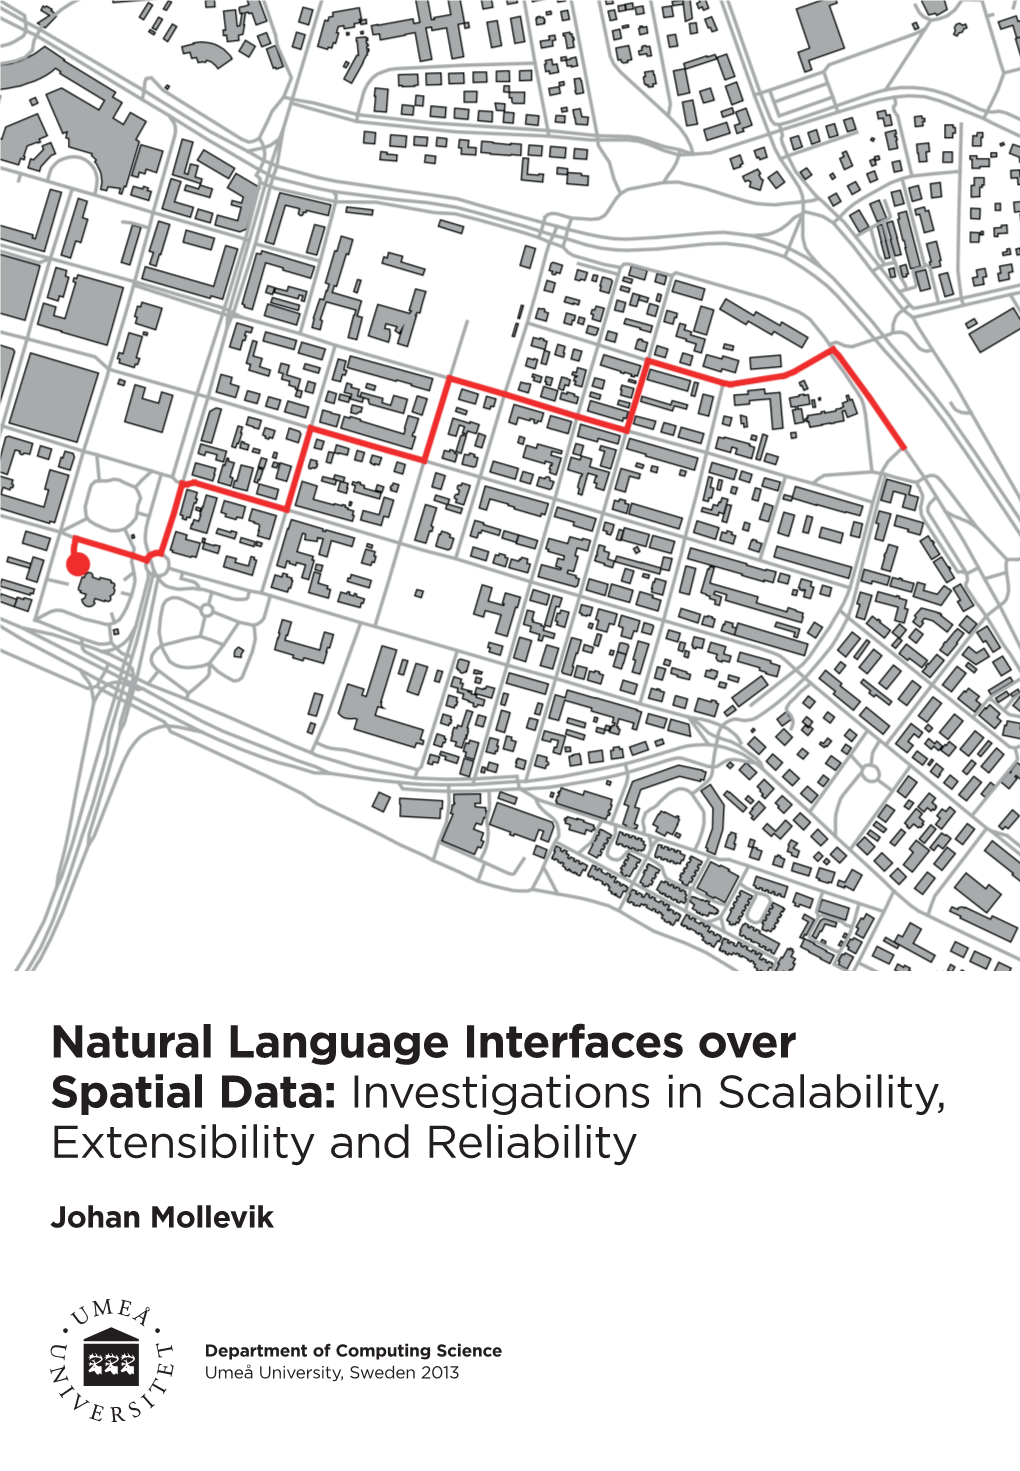 Natural Language Interfaces Over Spatial Data: Investigations in Scalability, Extensibility and Reliability